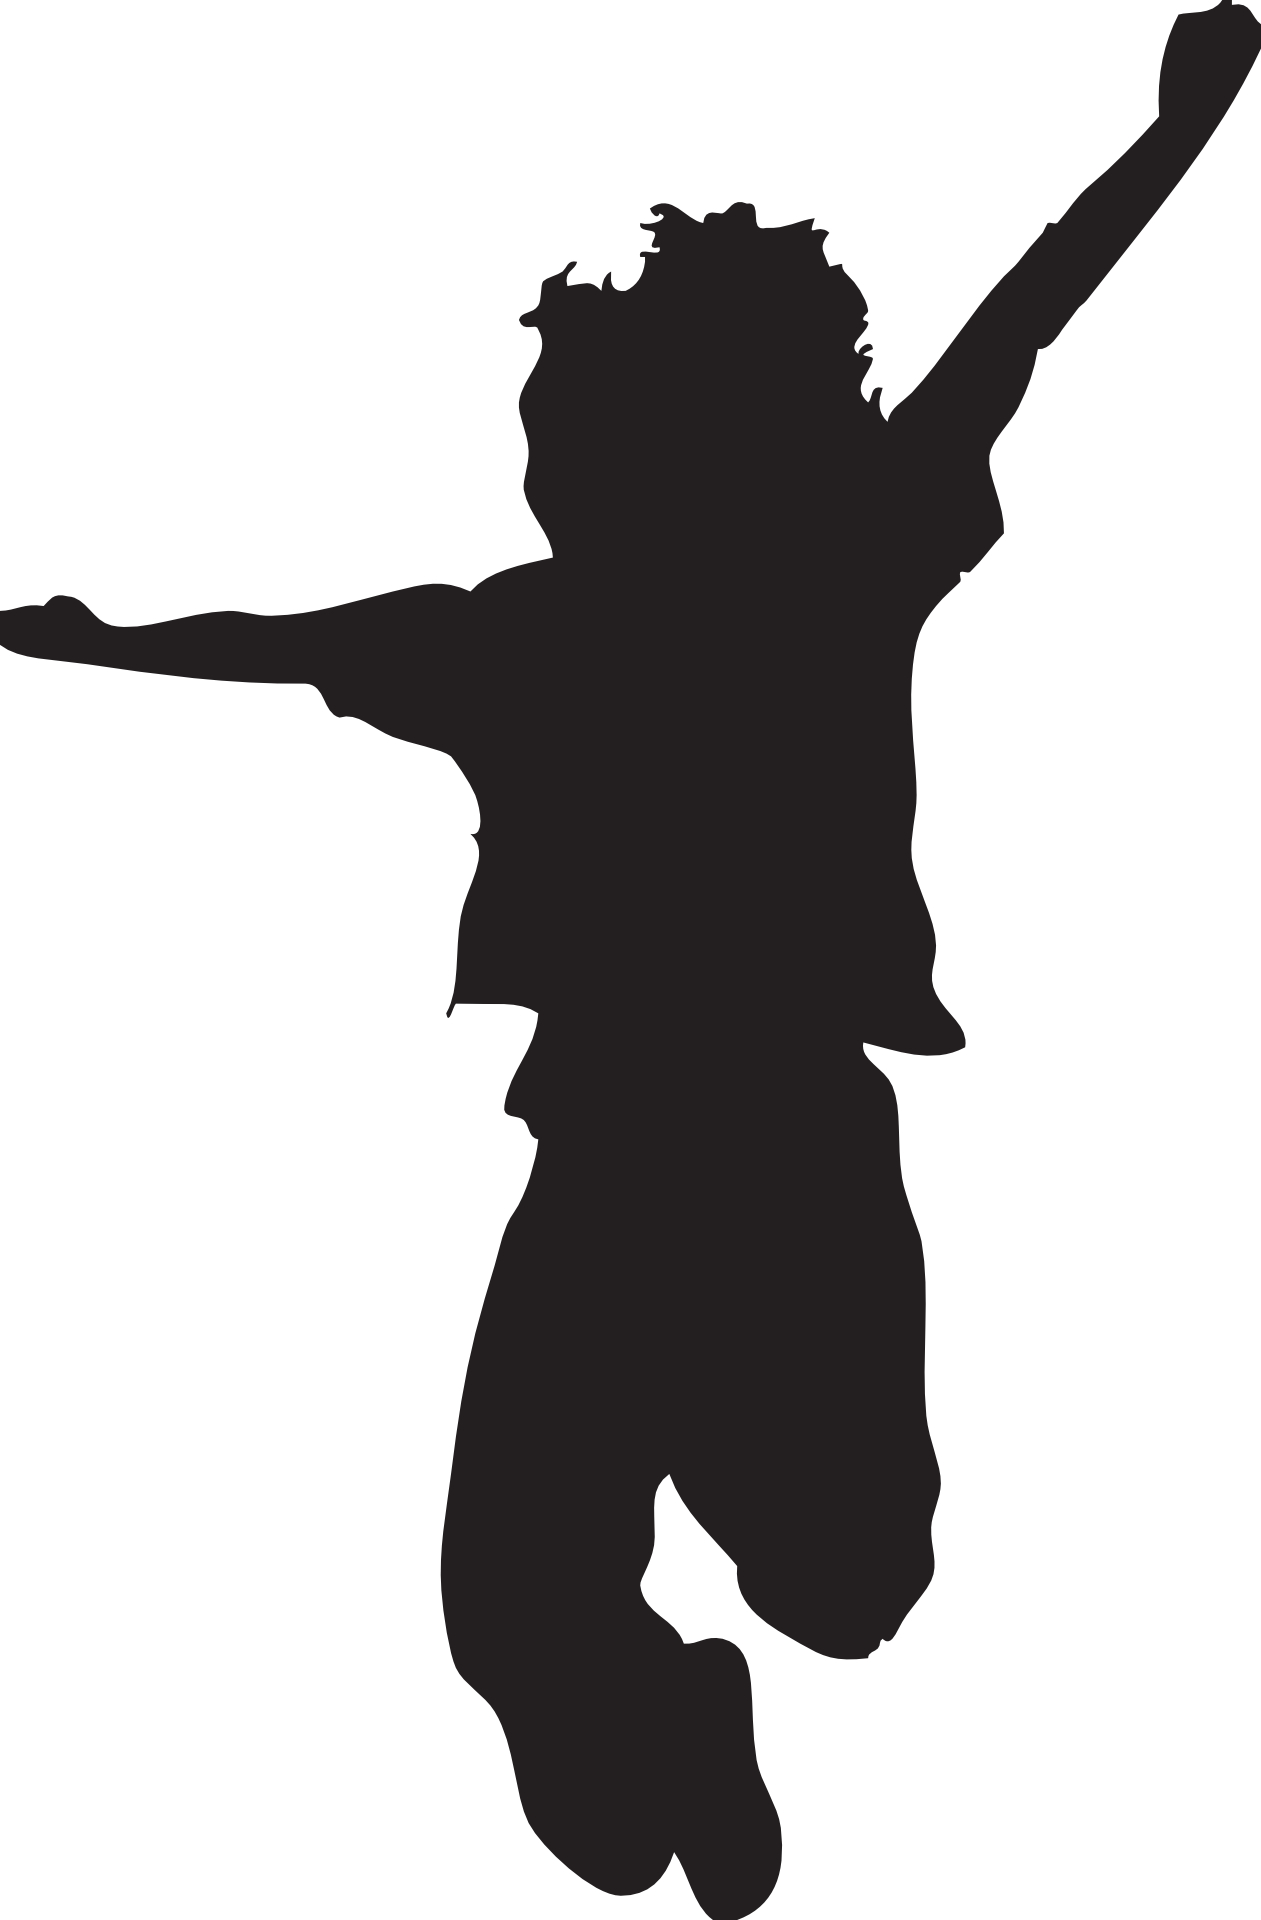 Jumping Silhouette   Clipart Best